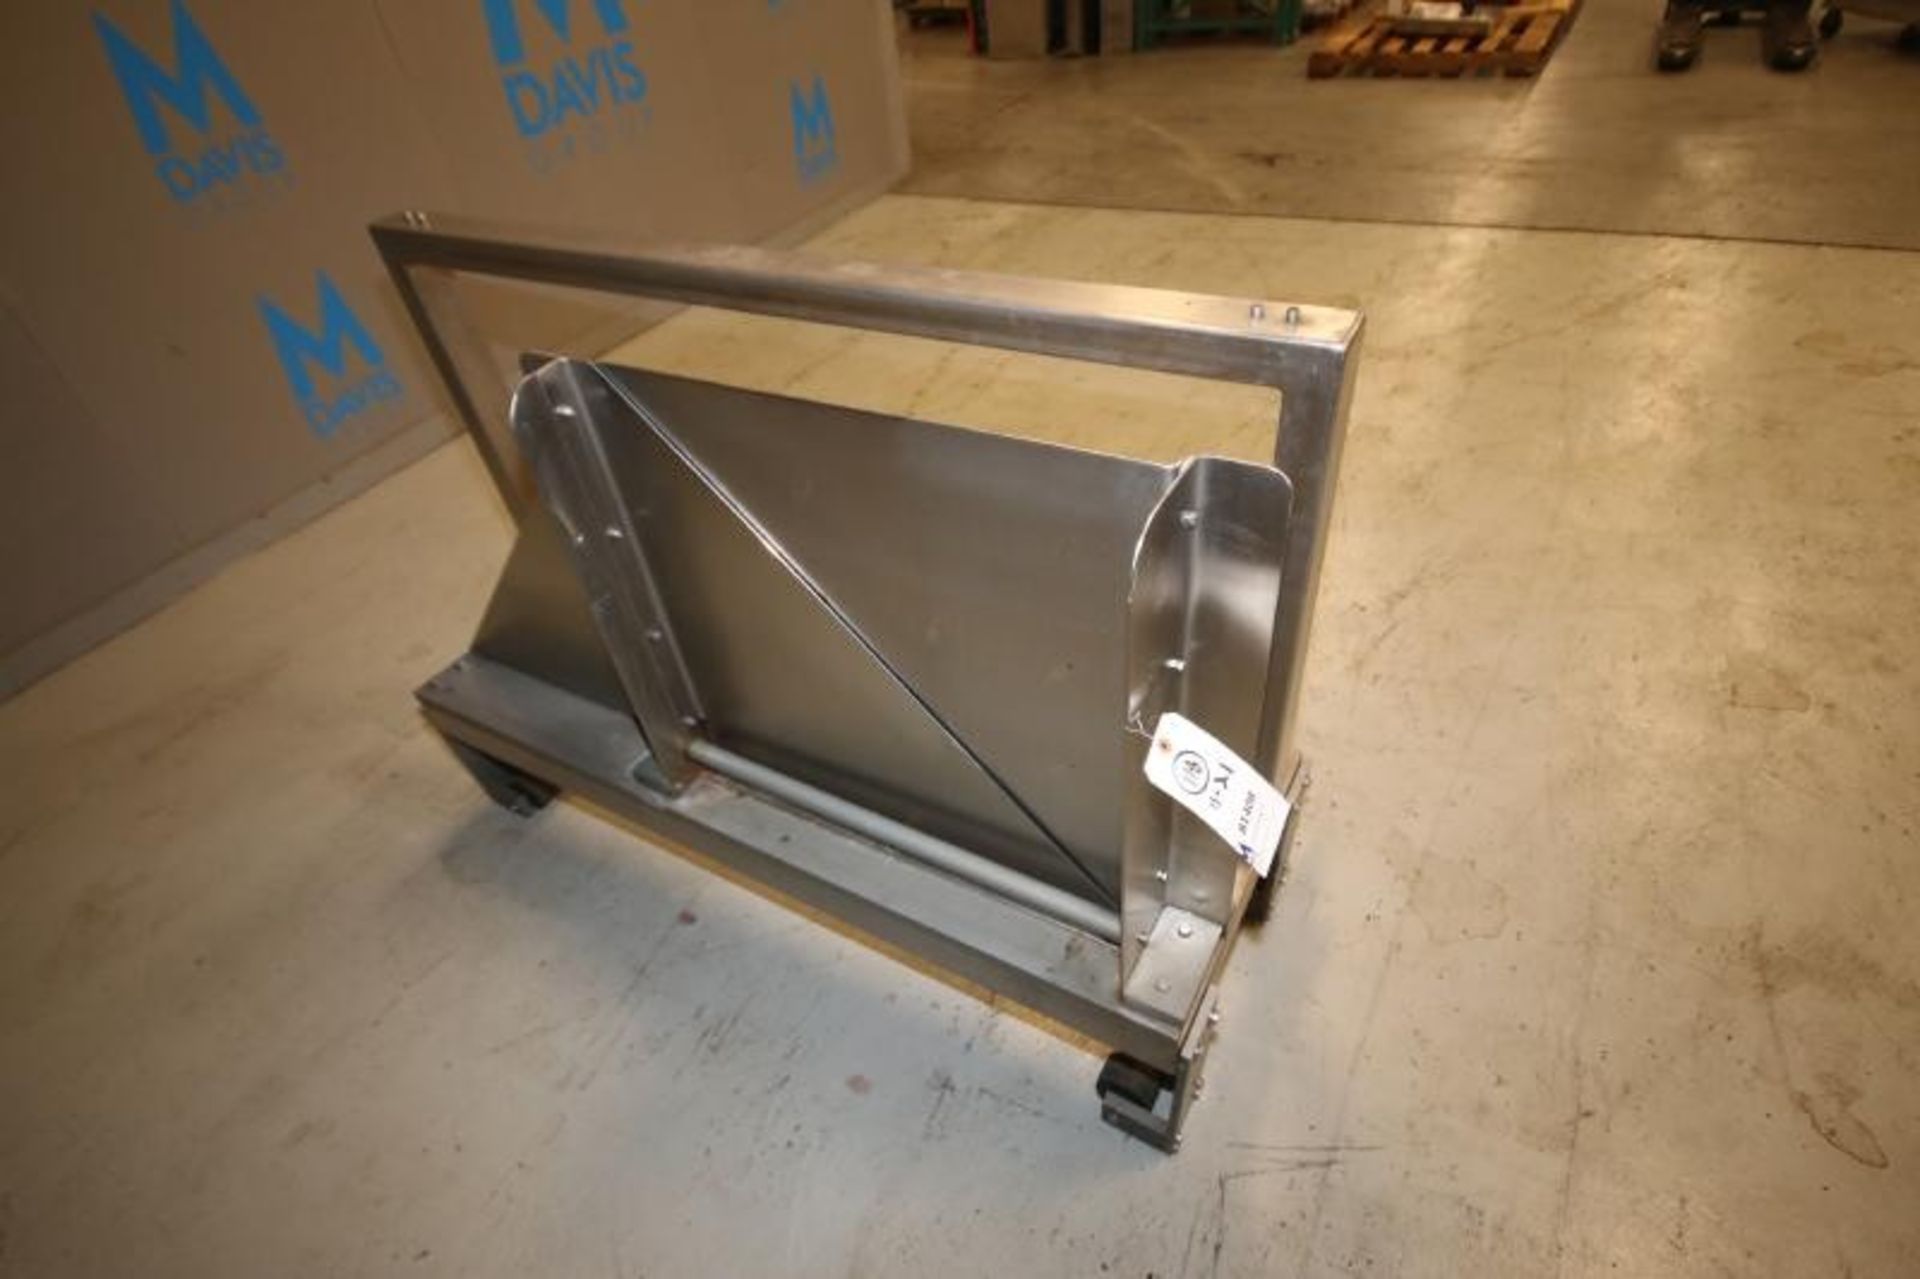 S/S Rack with Rollers, 55" L x 27" W x 41" H, Mounted on Wheels (INV#81408)(Located @ the MDG - Image 3 of 3